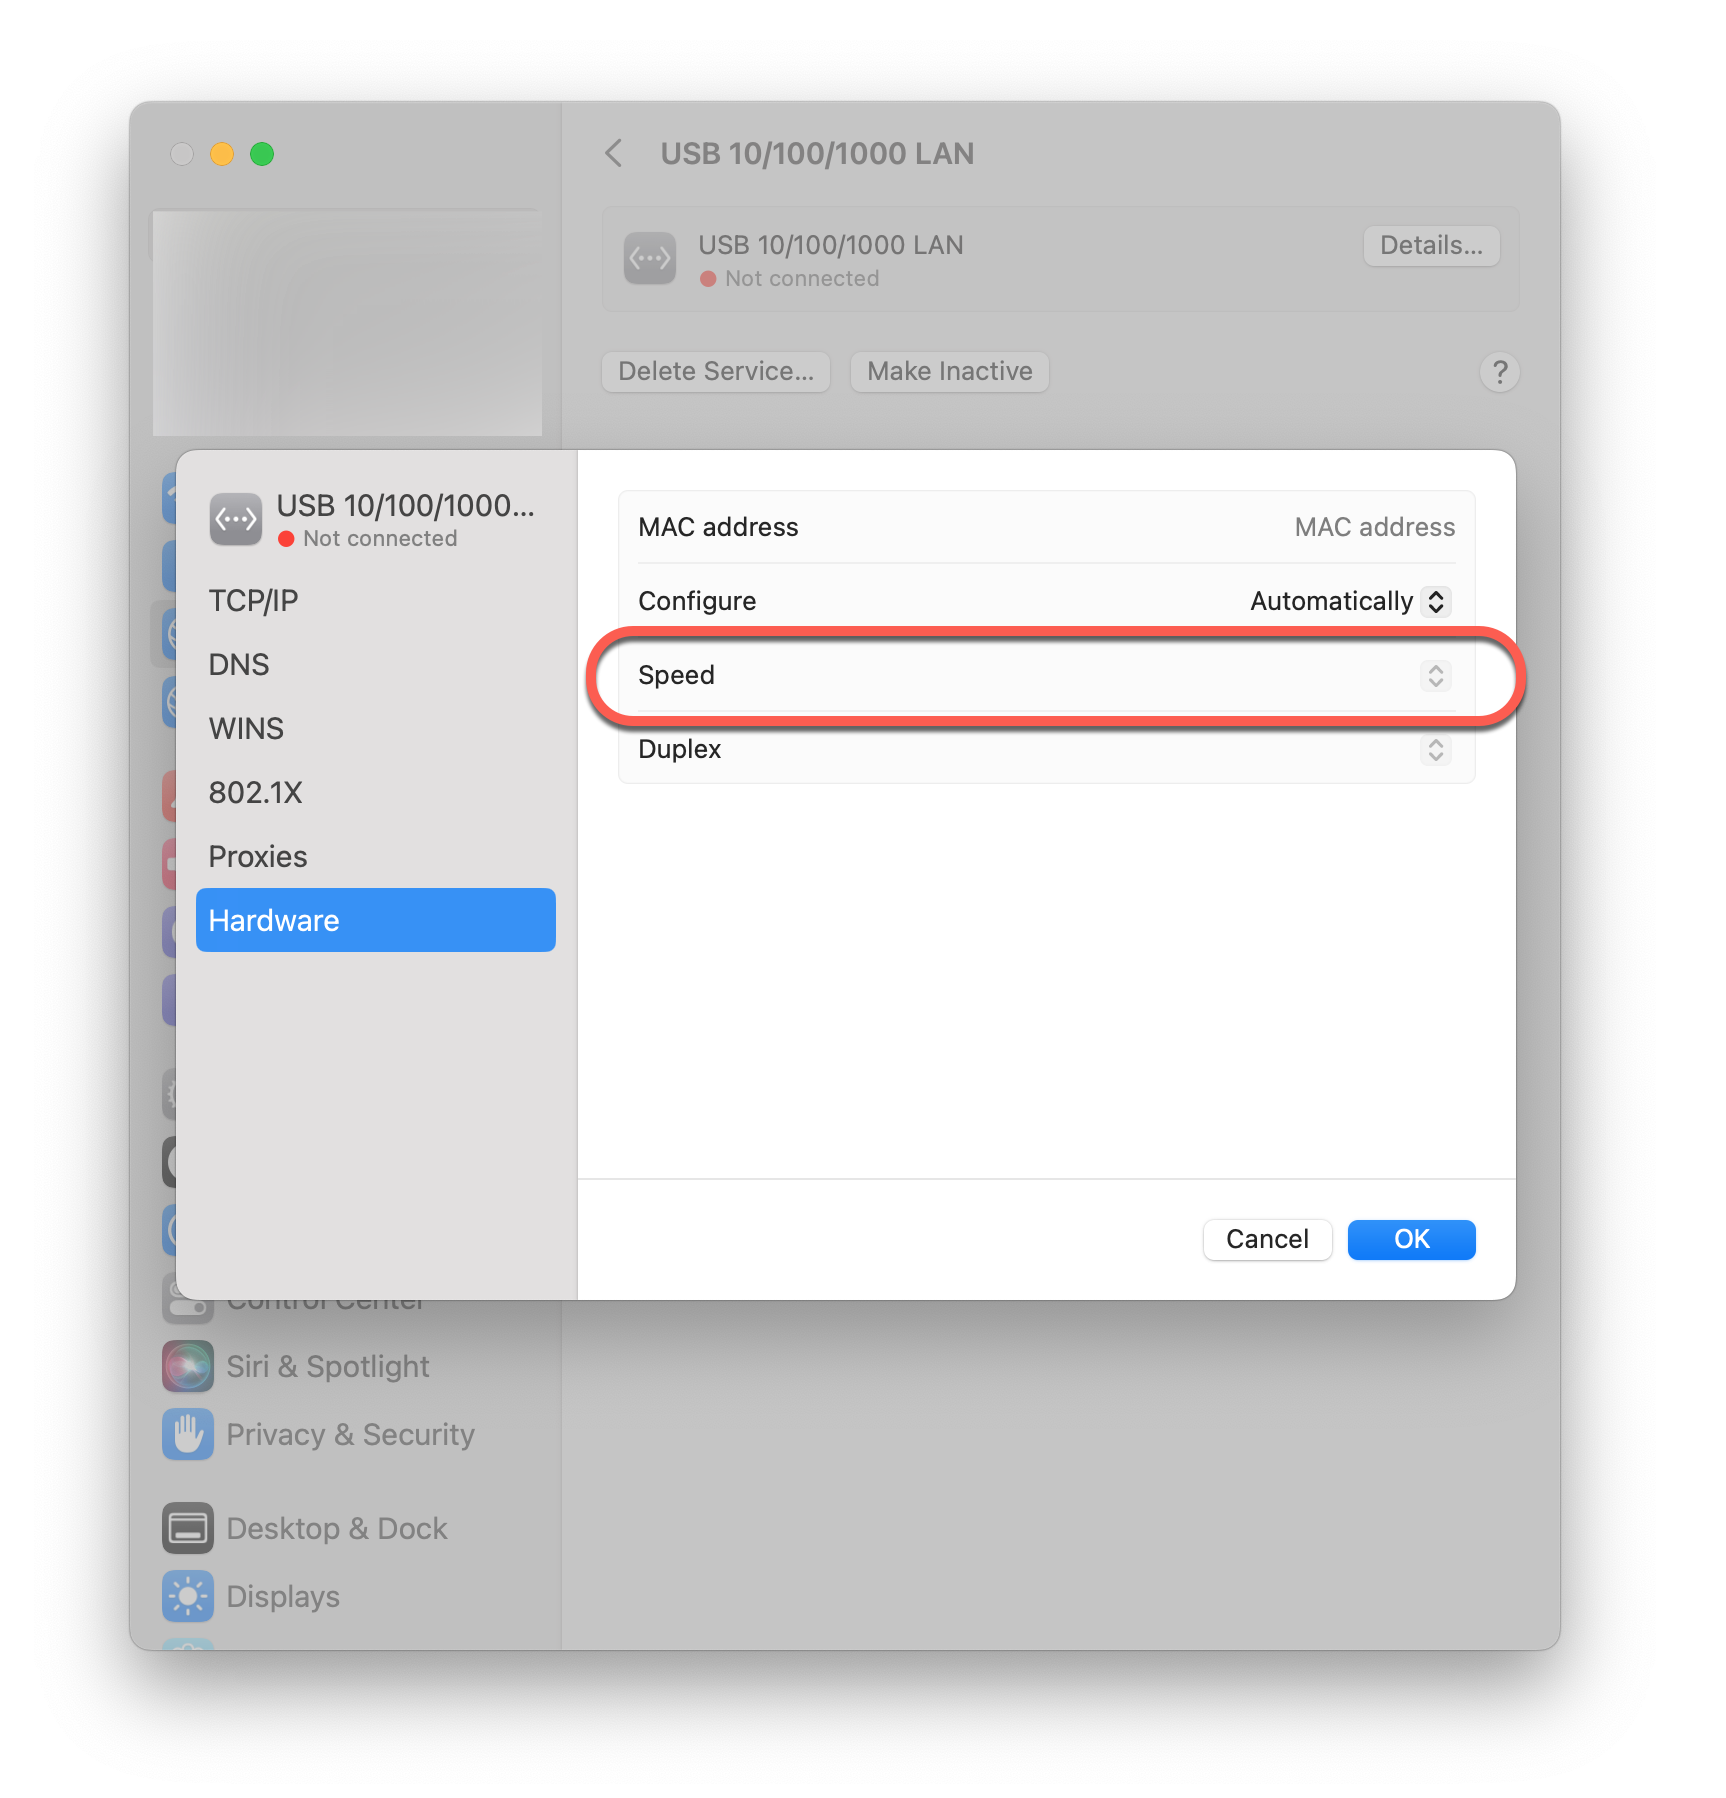 MacOS connecting menu displays the option to set hardware speed to automatic or a fixed speed.